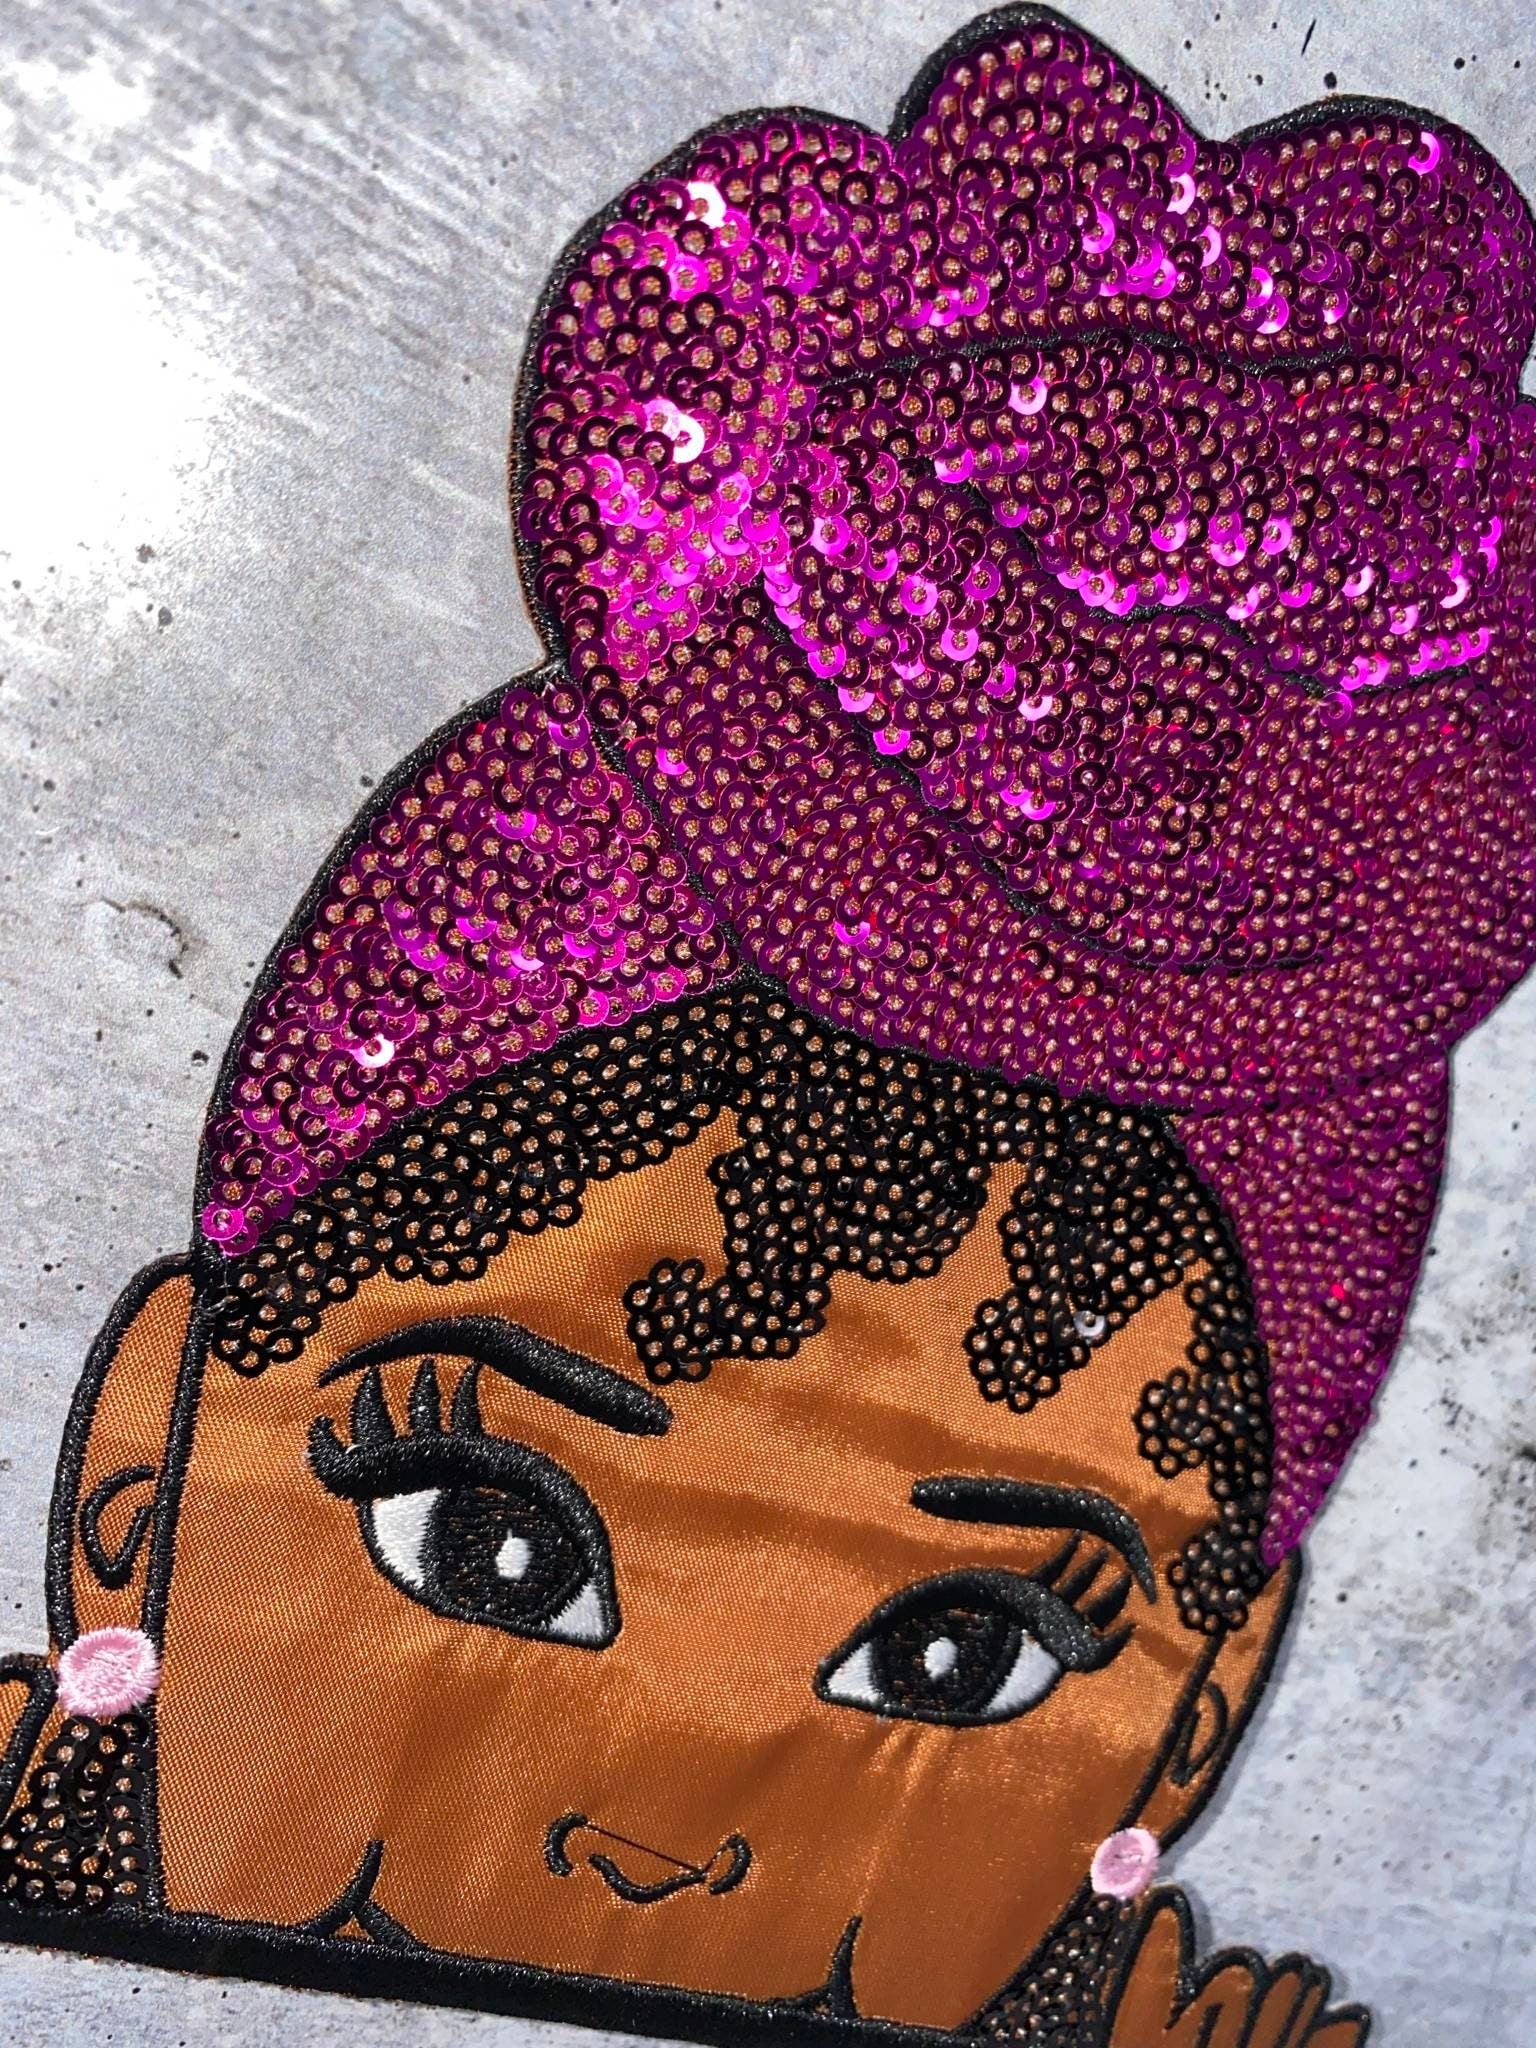 New, SEQUINS & Satin Peek-a-boo "Sasha" 7"x7.6" Patch, Iron-on/Sew-on, Exclusive Applique, Patch for Girls Jacket, Bling Patch